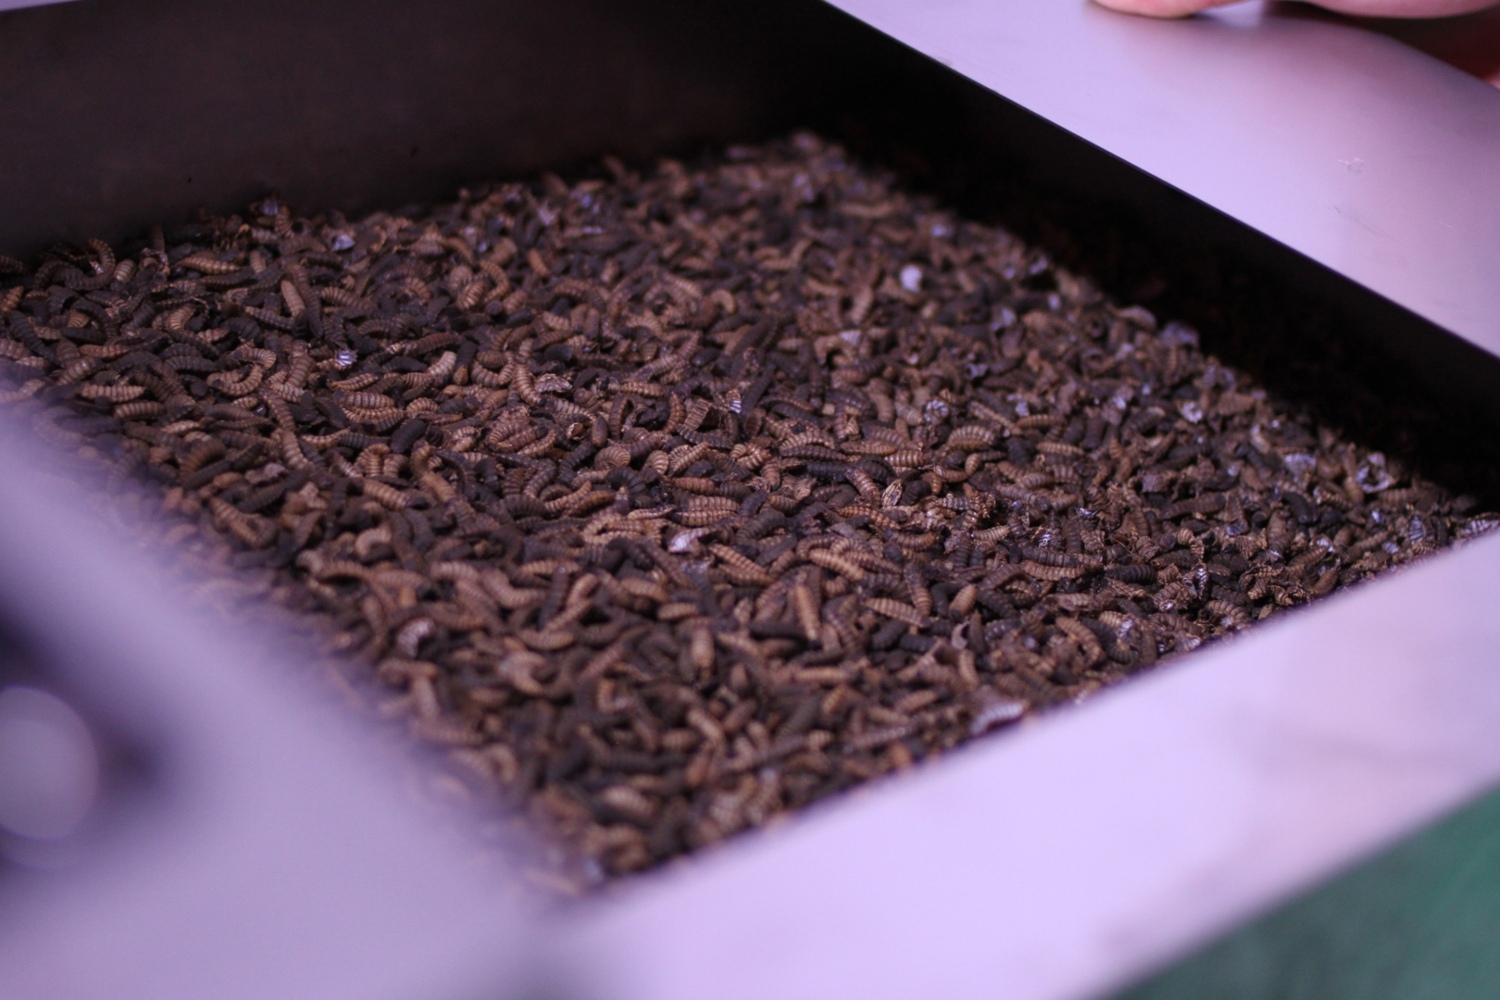 Using insects to turn food waste into animal feed: Agriprotein